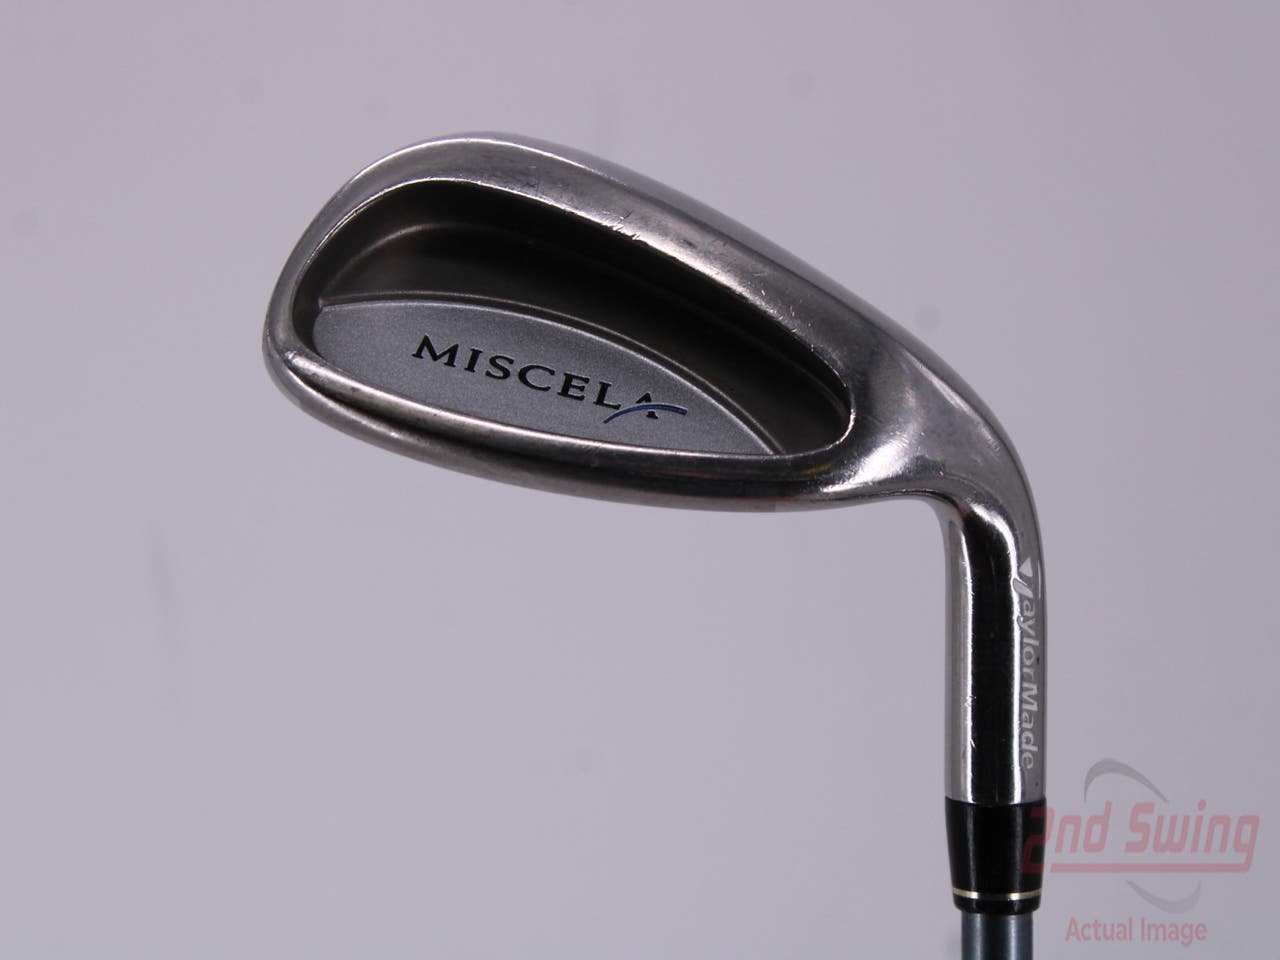 TaylorMade Miscela Single Iron Pitching Wedge PW TM miscela Graphite Regular Right Handed 36.0in